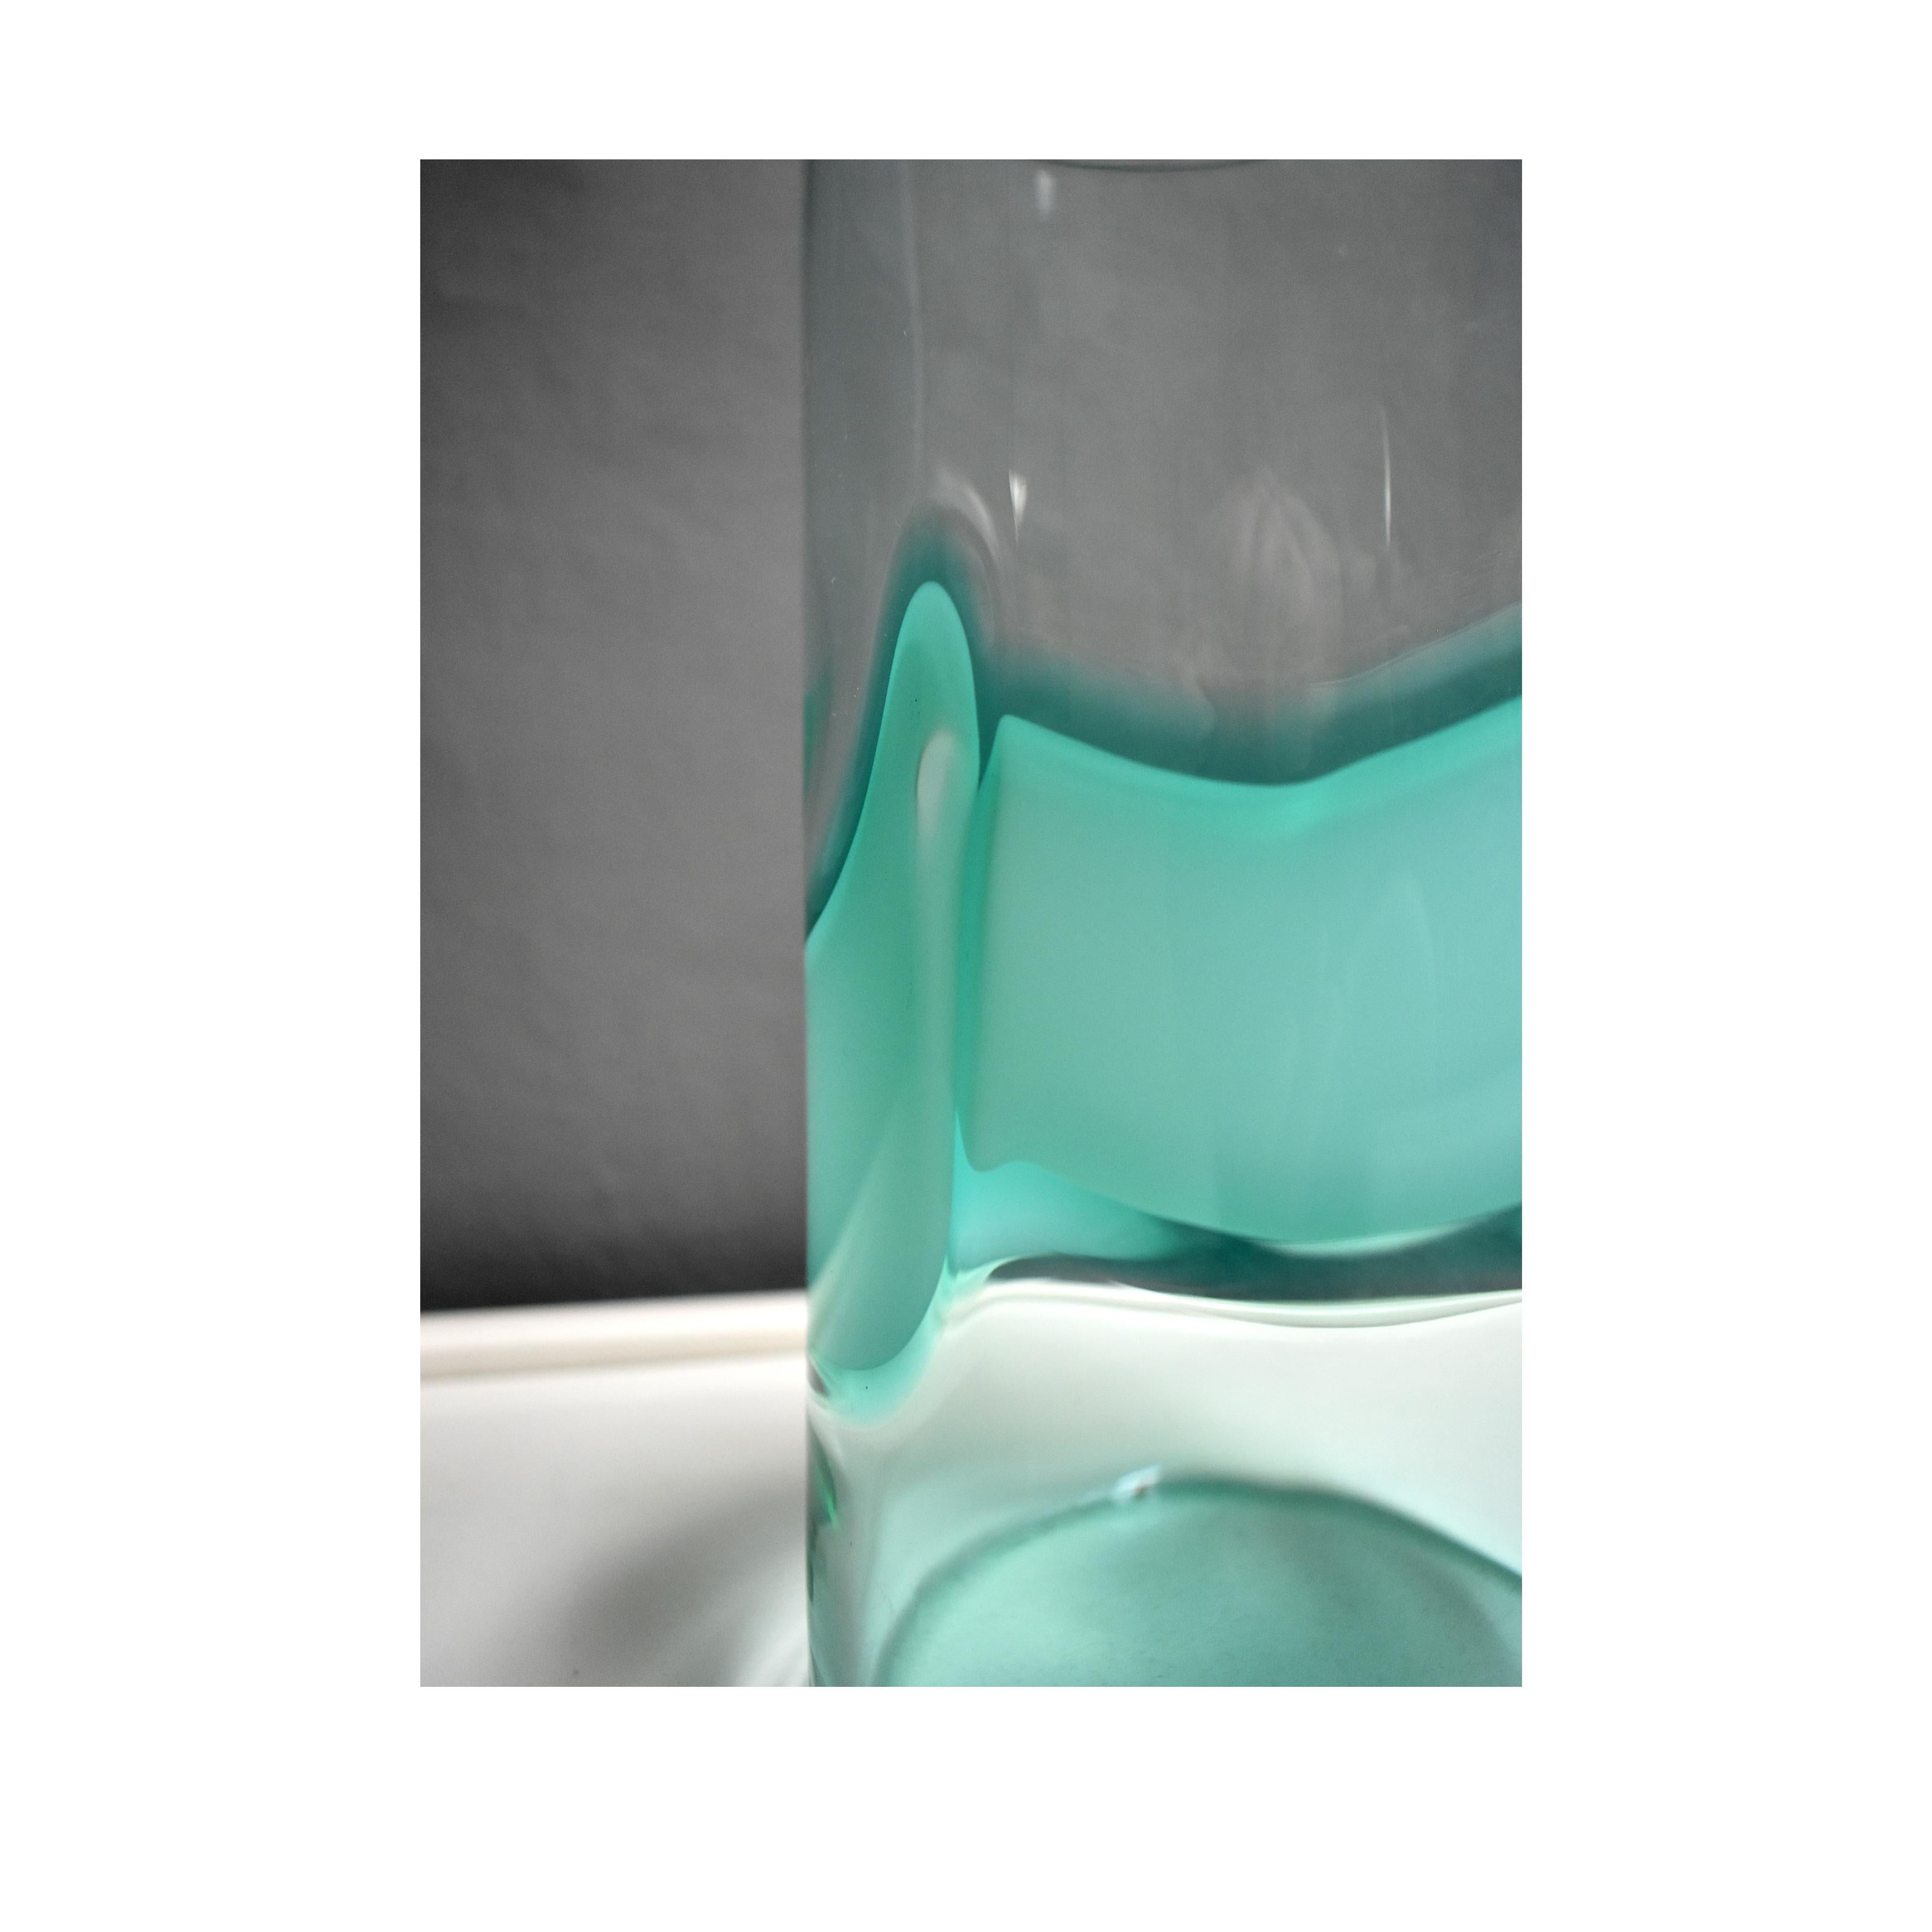 Italian Murano Glass Cilindrical Vase Produced by v. Nason&C: Transparent/Sea Water Blue For Sale